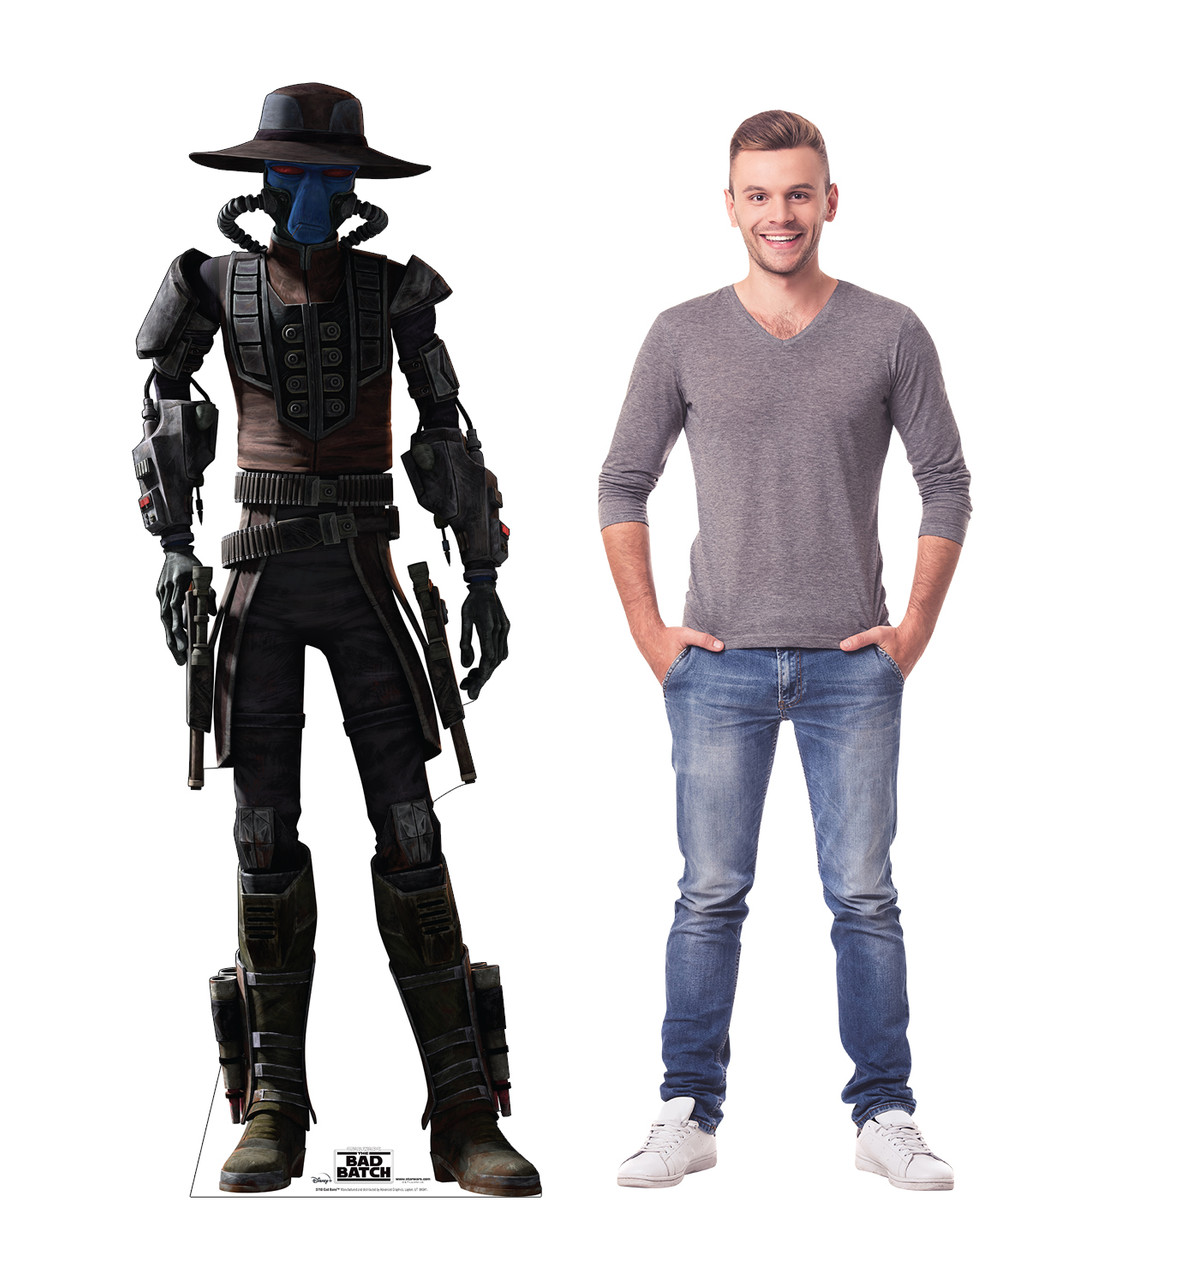 Life-size cardboard standee of Cad Bane from The Bad Batch on Disney+ with Model.